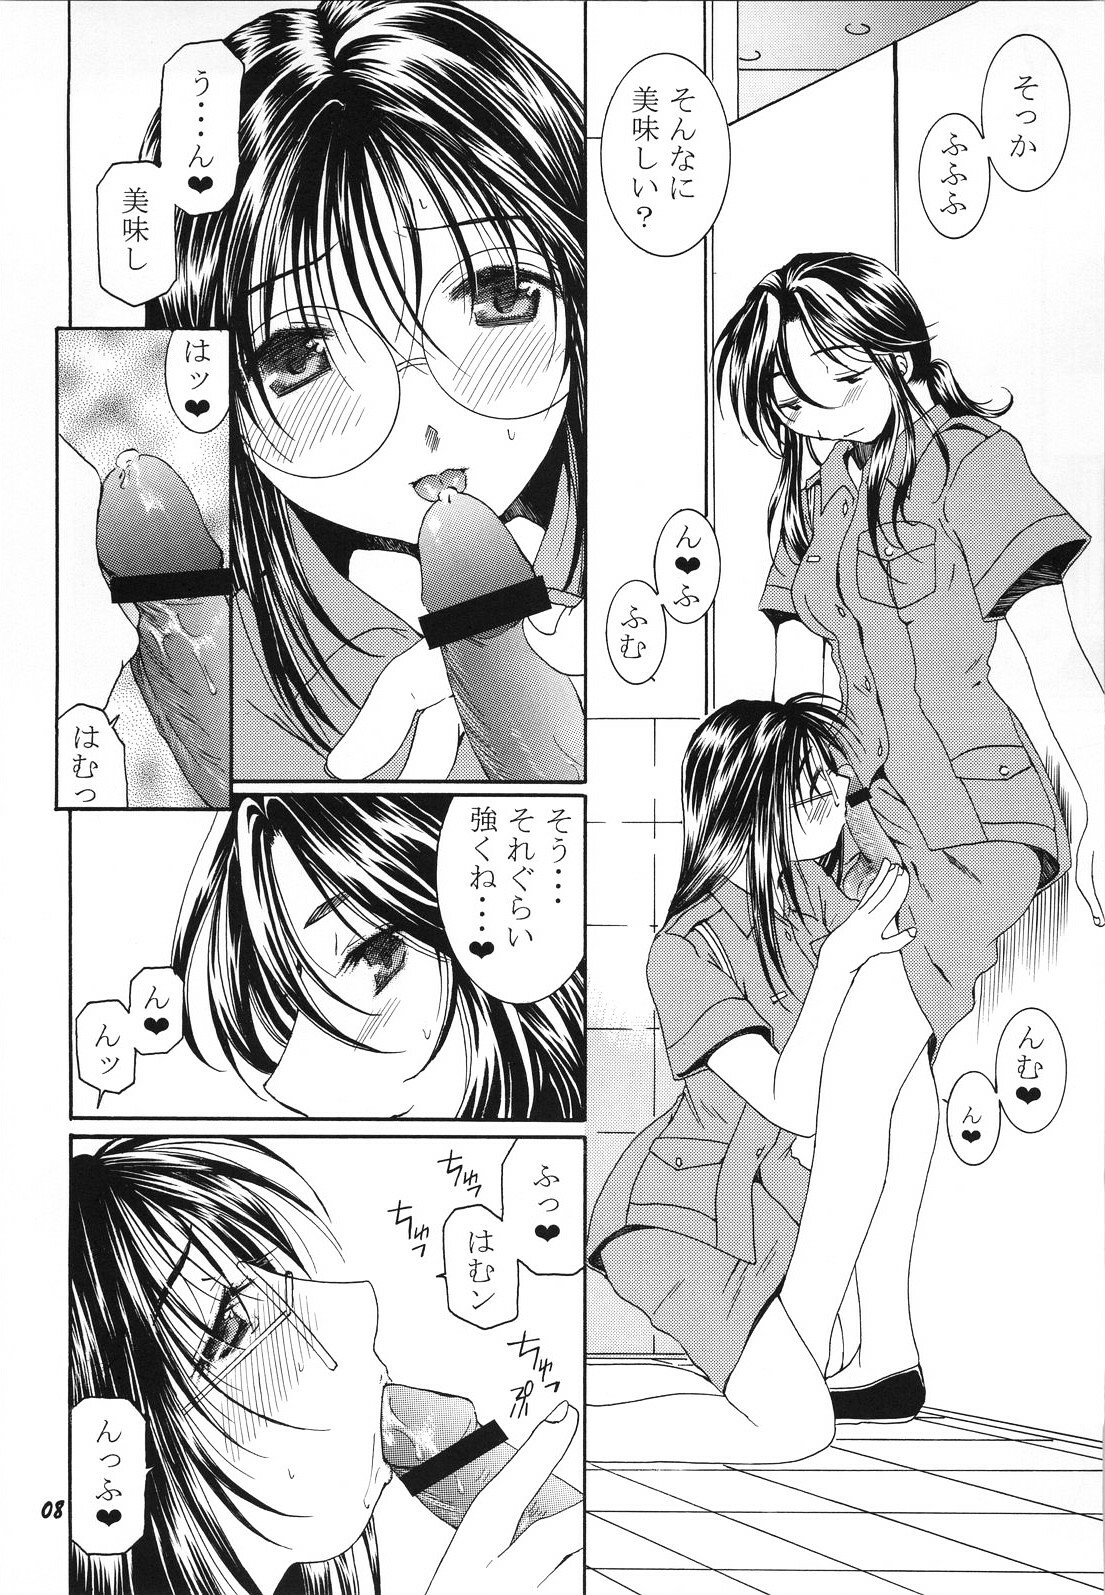 [Mechanical Code (Takahashi Kobato)] method to the madness 3 (You're Under Arrest!) page 7 full